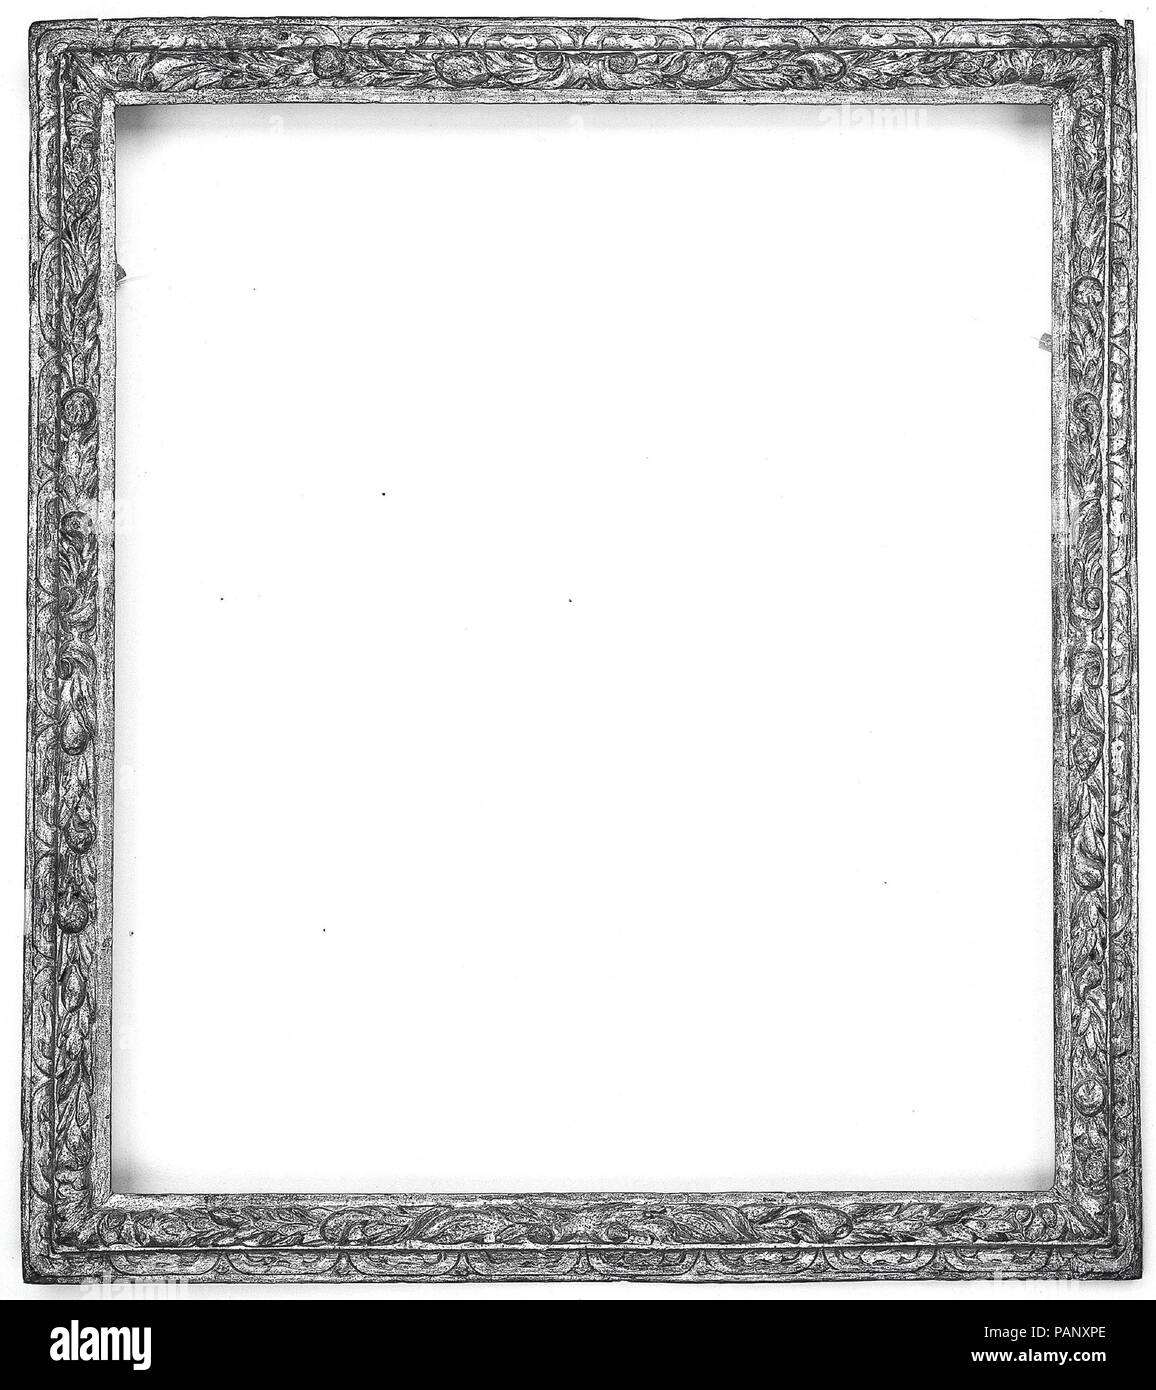 Astragal frame. Culture: Italian, Veneto. Dimensions: Overall: 40 1/2 x 36. Date: early 17th century. Museum: Metropolitan Museum of Art, New York, USA. Stock Photo